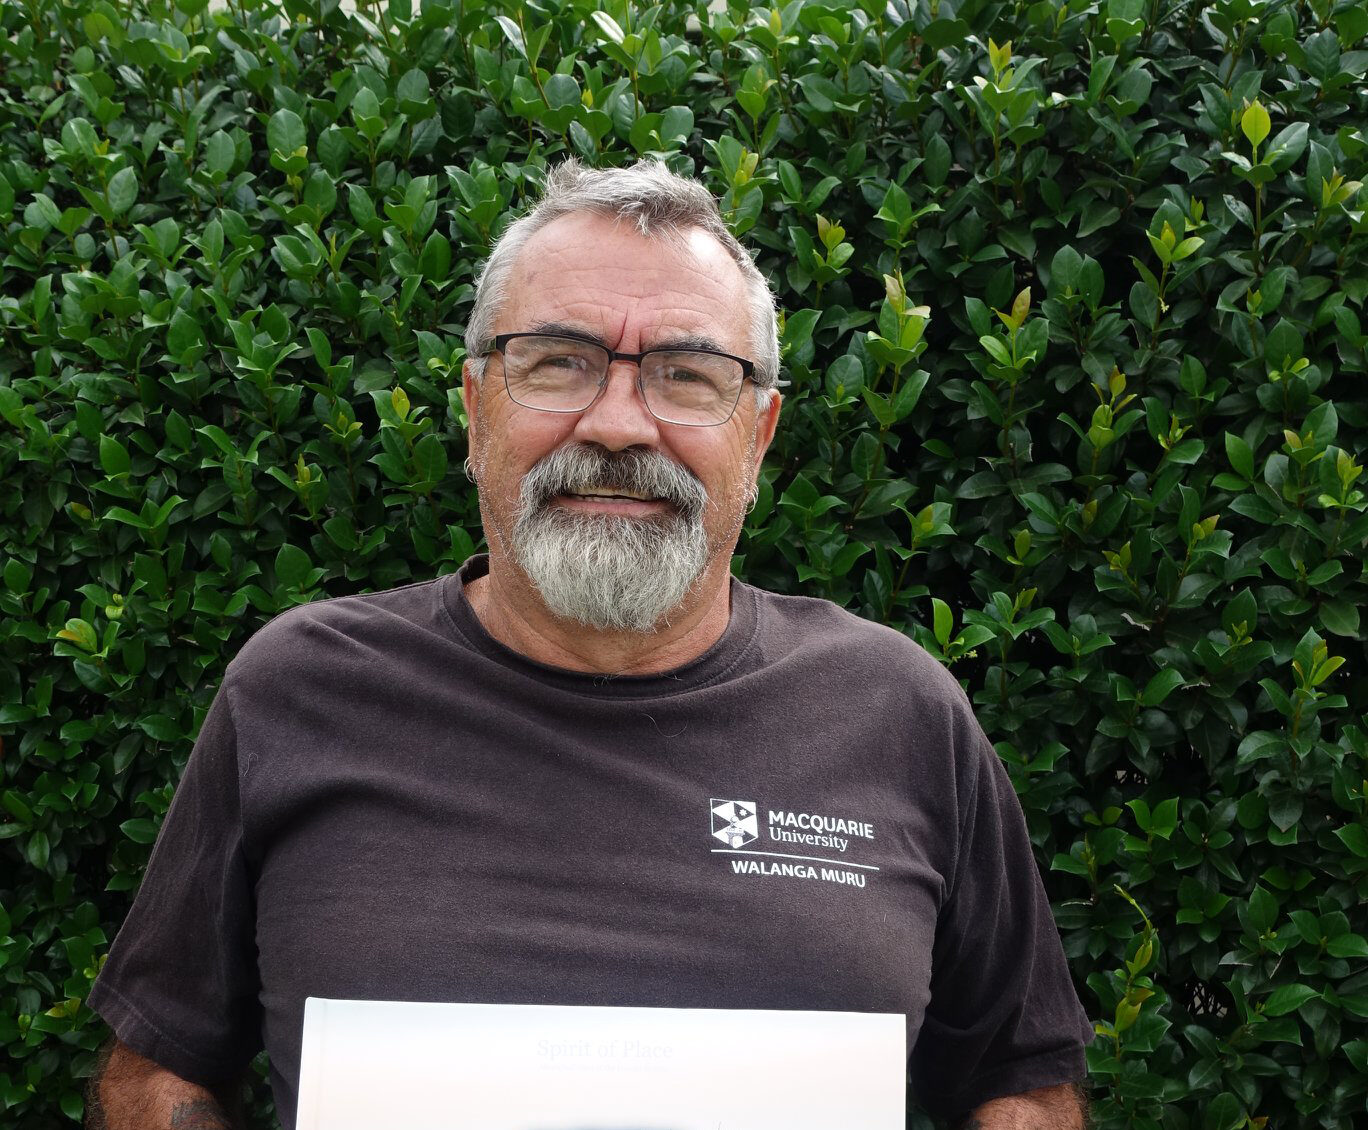 A man with glasses, short gray hair and circle beard stands outdoors holding a copy of his book and smiling.